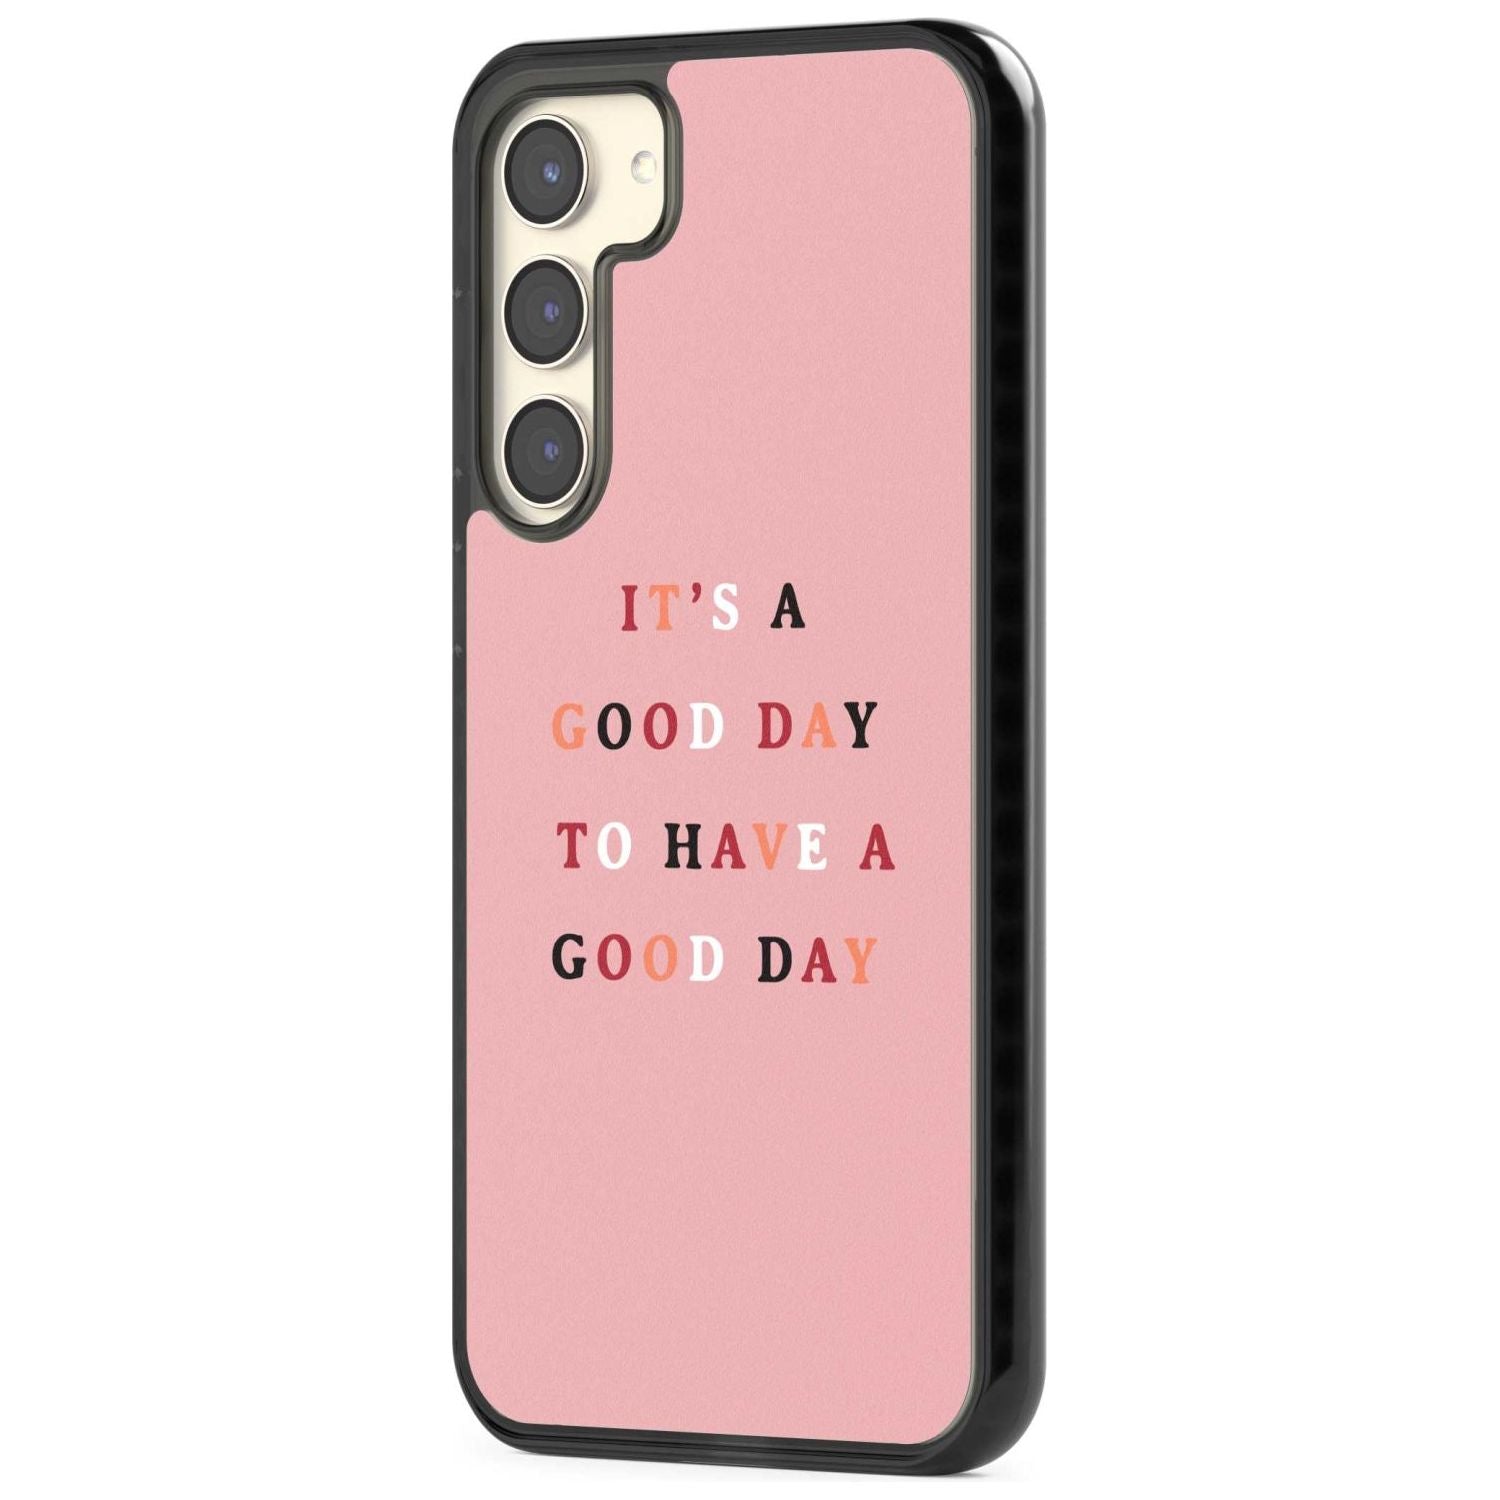 It's a good day to have a good day Phone Case iPhone 15 Pro Max / Black Impact Case,iPhone 15 Plus / Black Impact Case,iPhone 15 Pro / Black Impact Case,iPhone 15 / Black Impact Case,iPhone 15 Pro Max / Impact Case,iPhone 15 Plus / Impact Case,iPhone 15 Pro / Impact Case,iPhone 15 / Impact Case,iPhone 15 Pro Max / Magsafe Black Impact Case,iPhone 15 Plus / Magsafe Black Impact Case,iPhone 15 Pro / Magsafe Black Impact Case,iPhone 15 / Magsafe Black Impact Case,iPhone 14 Pro Max / Black Impact Case,iPhone 14